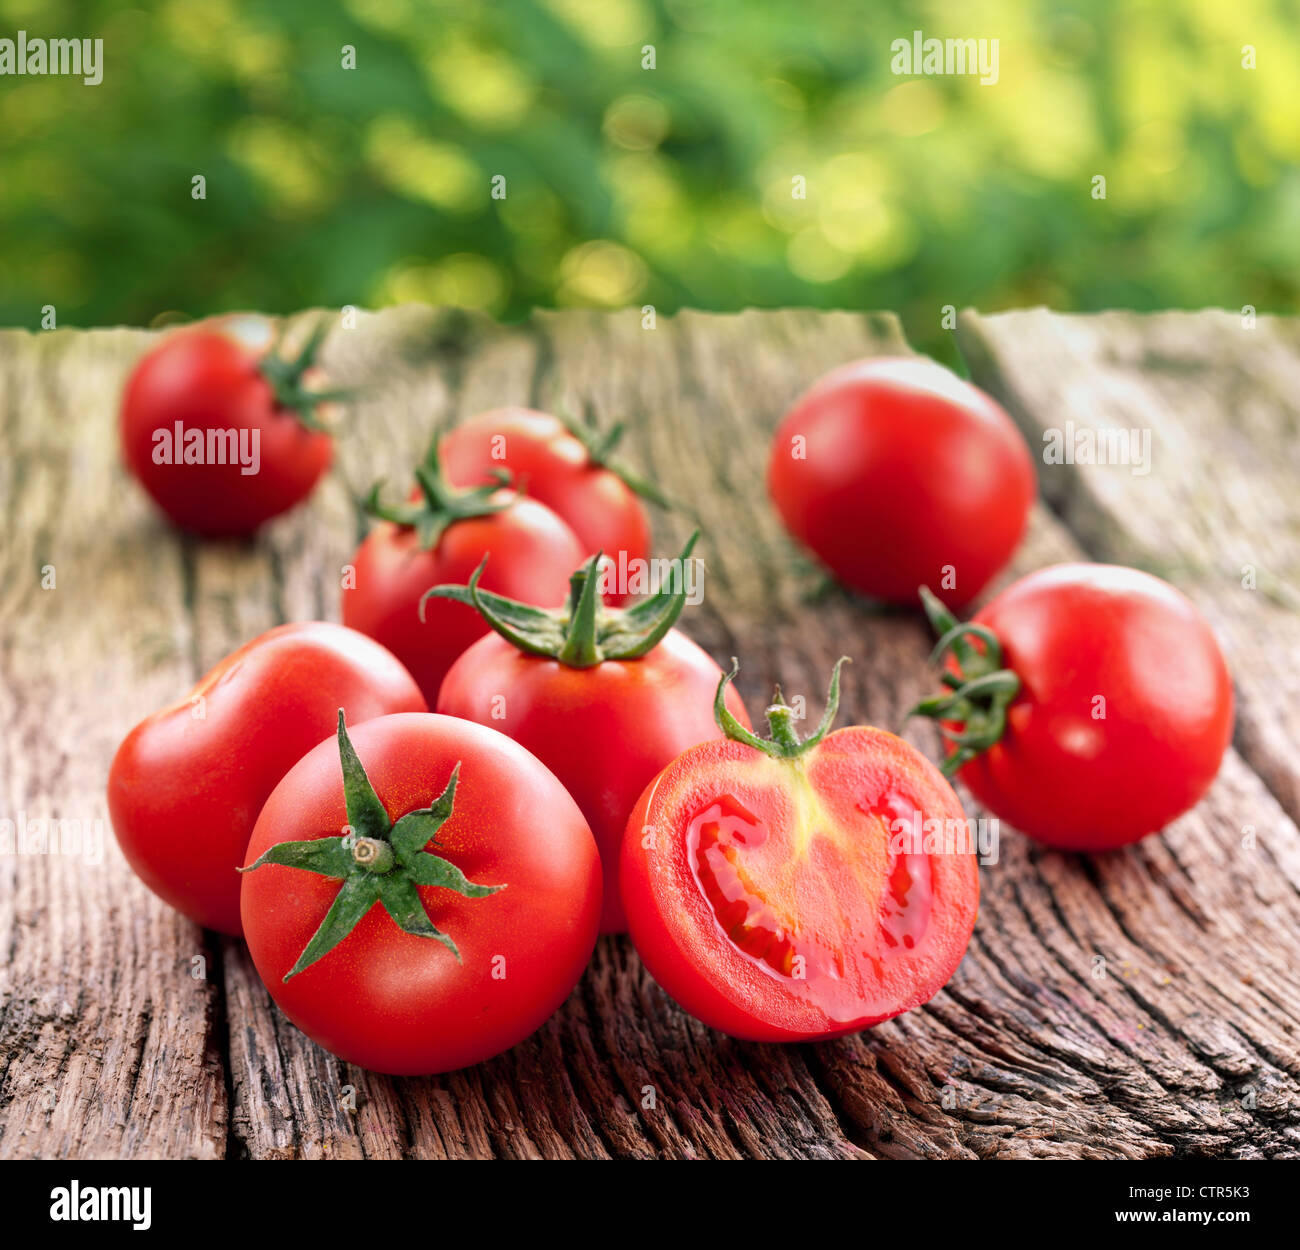 Tomatoes, cooked with herbs for the preservation on the old wooden table. Stock Photo